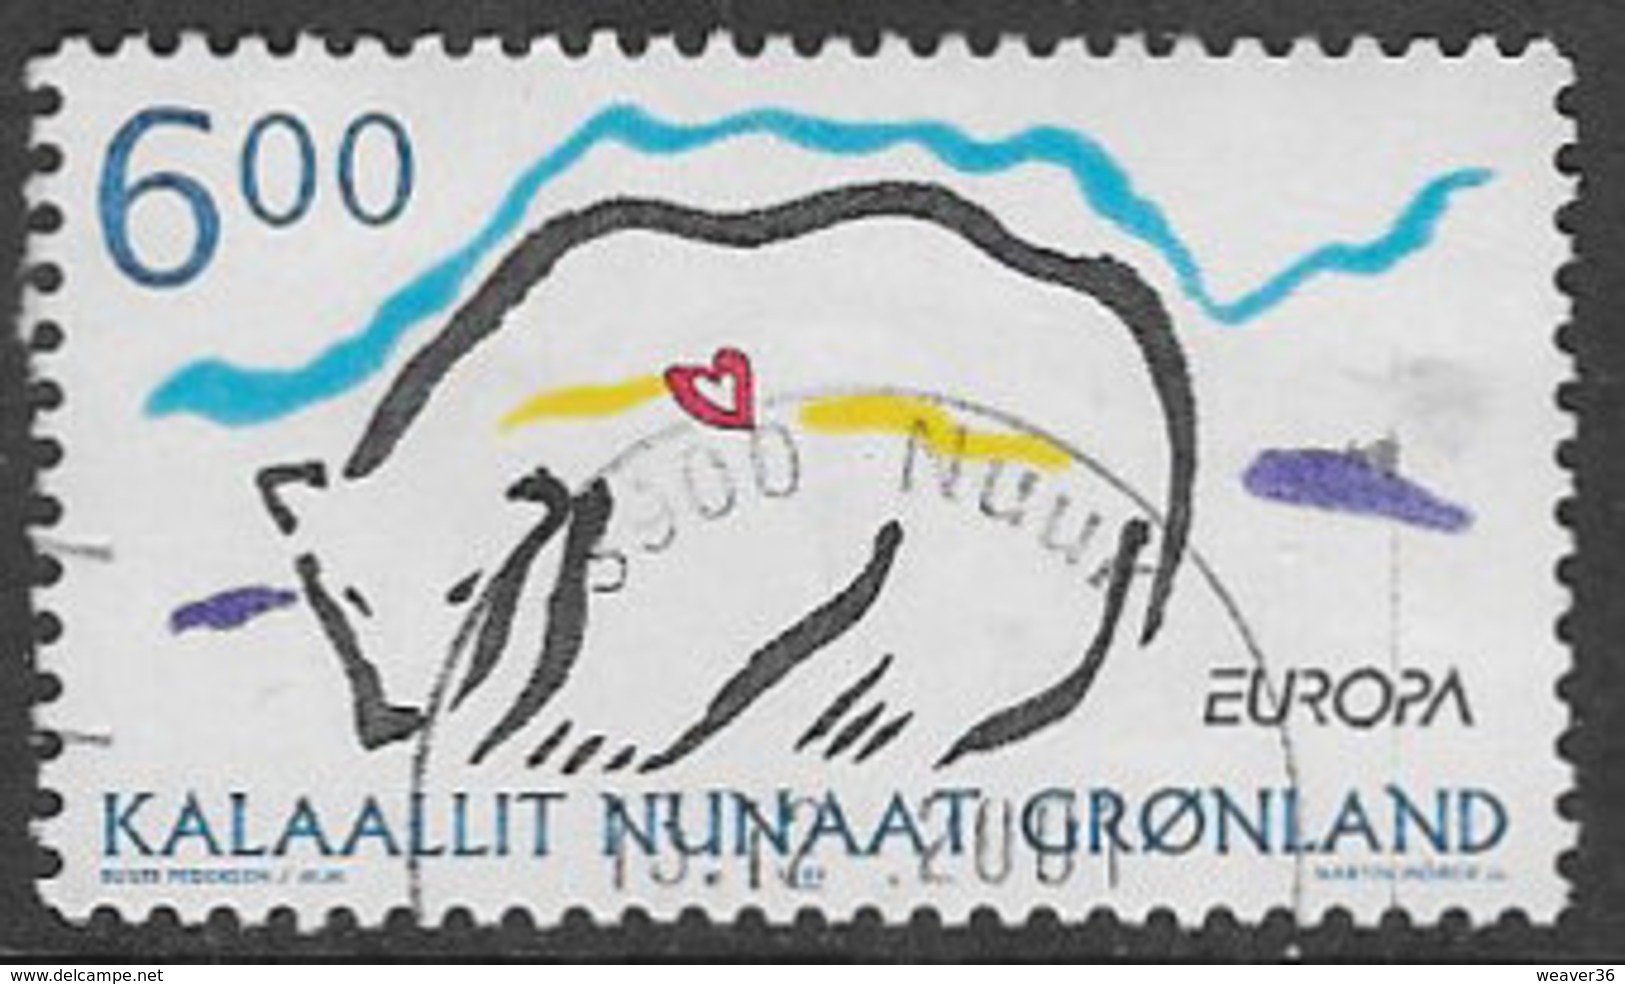 Greenland SG352 1999 Europa 6k Good/fine Used [39/31715/6D] - Used Stamps